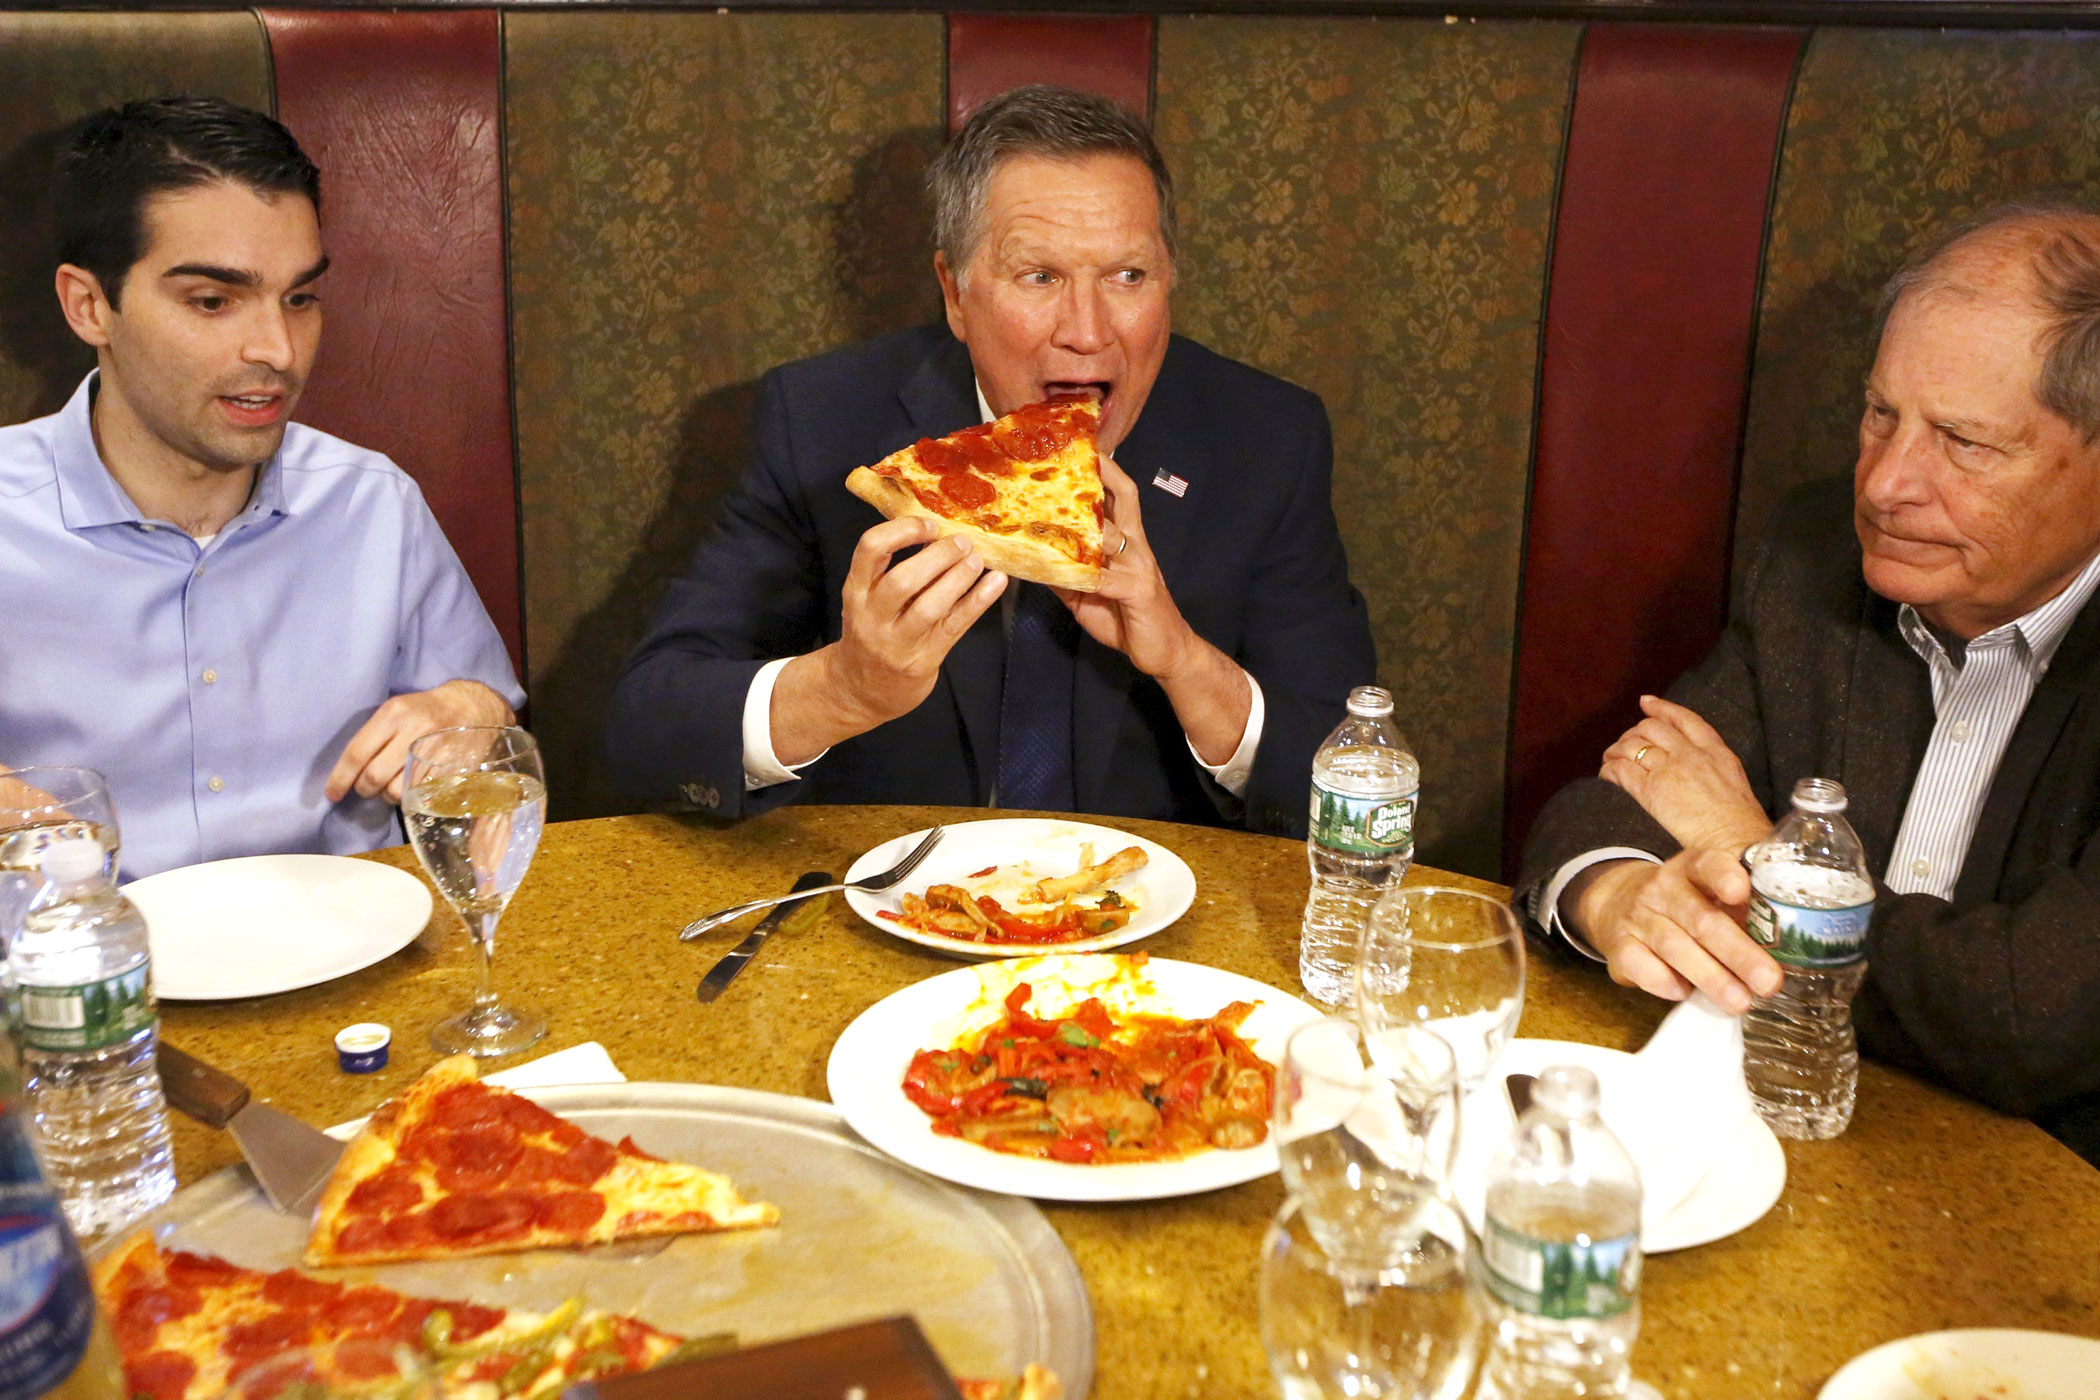 Republican presidential candidate, Ohio Gov. John Kasich eats a slice of pizza with Eric Ulrich, left, New York City Council member for the 32nd District of Queens, and former Congressman Bob Turner at Gino's Pizzeria and Restaurant in the Queens borough of New York on March 30, 2016.